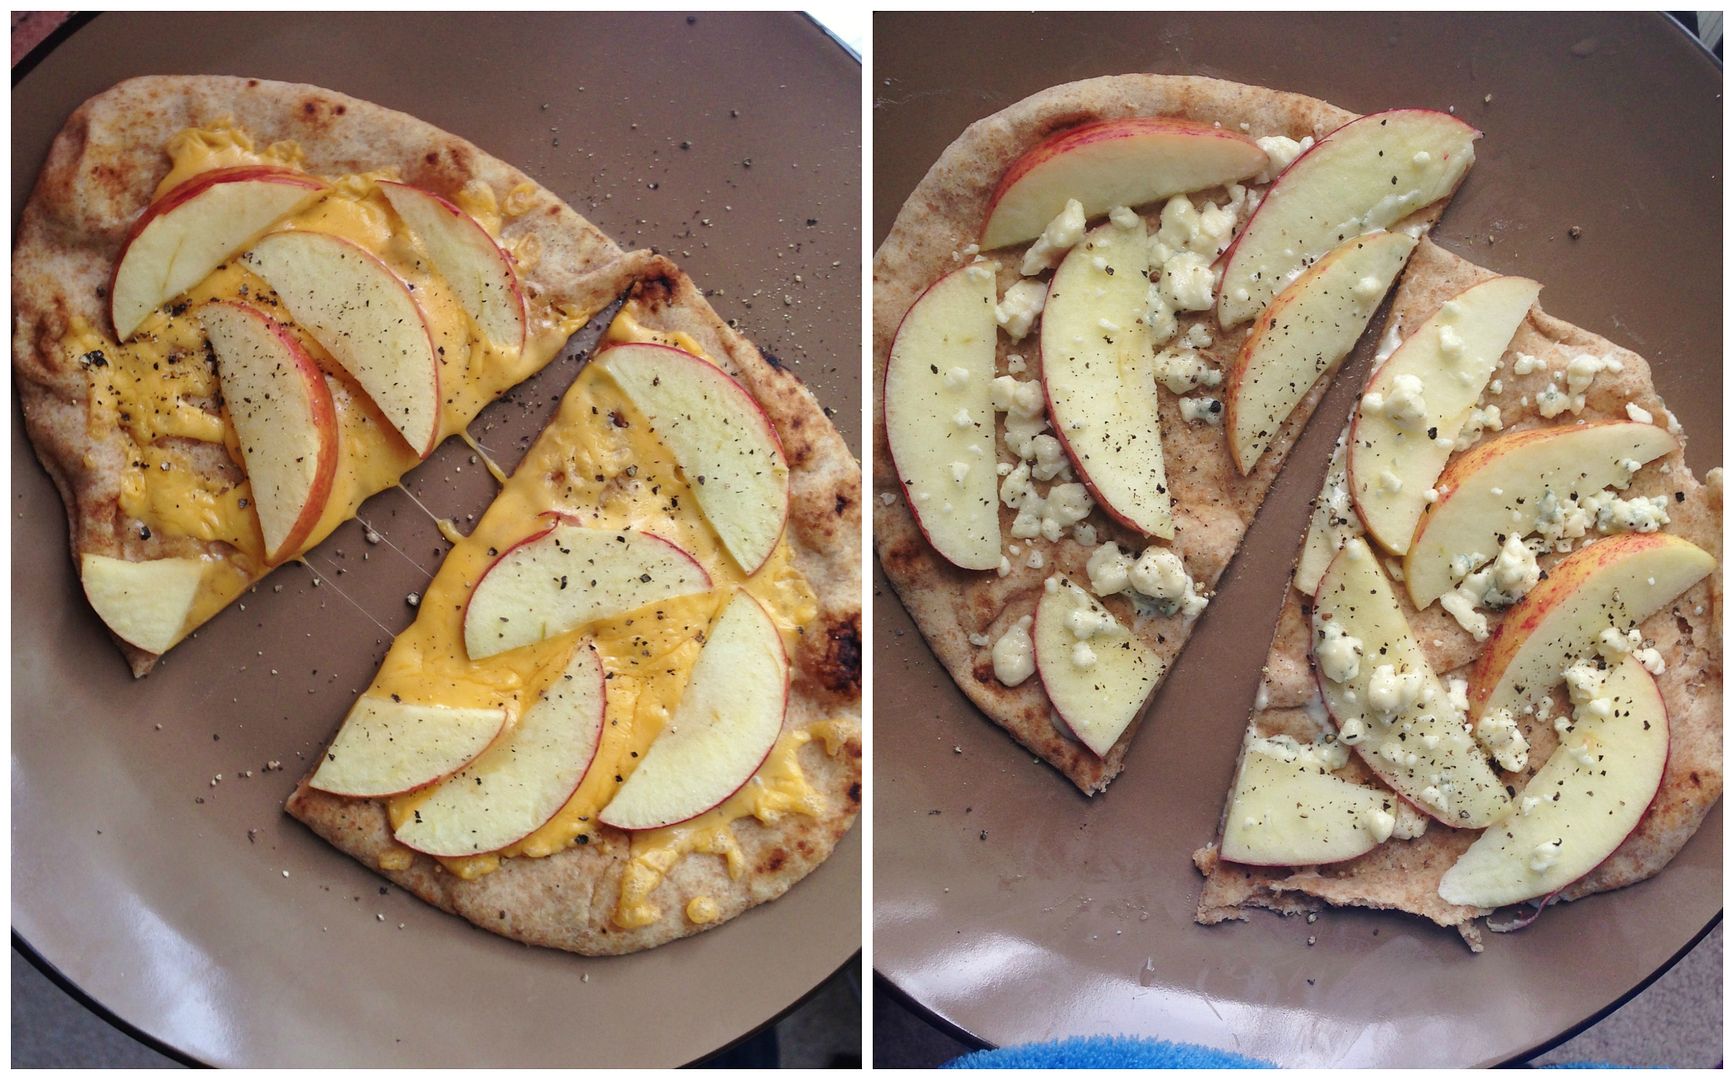  apple and cheese naan pizzas